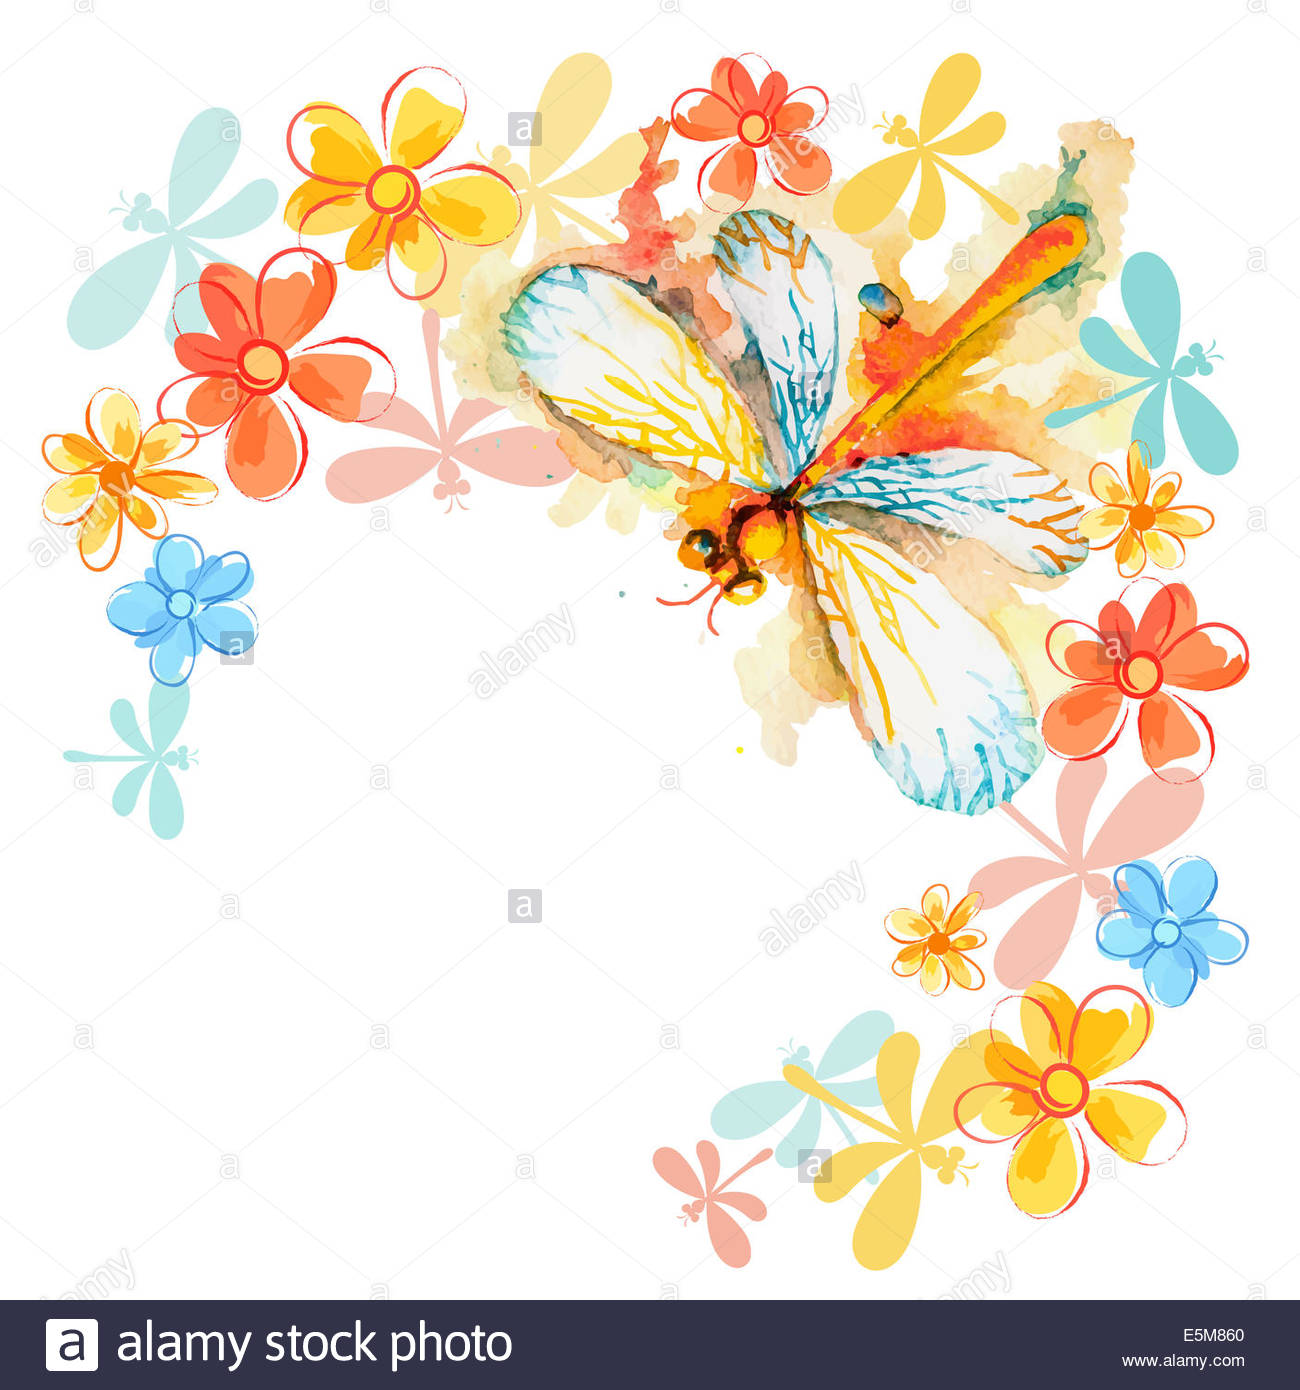 Greeting Background With Beautiful Watercolor Flying Orange